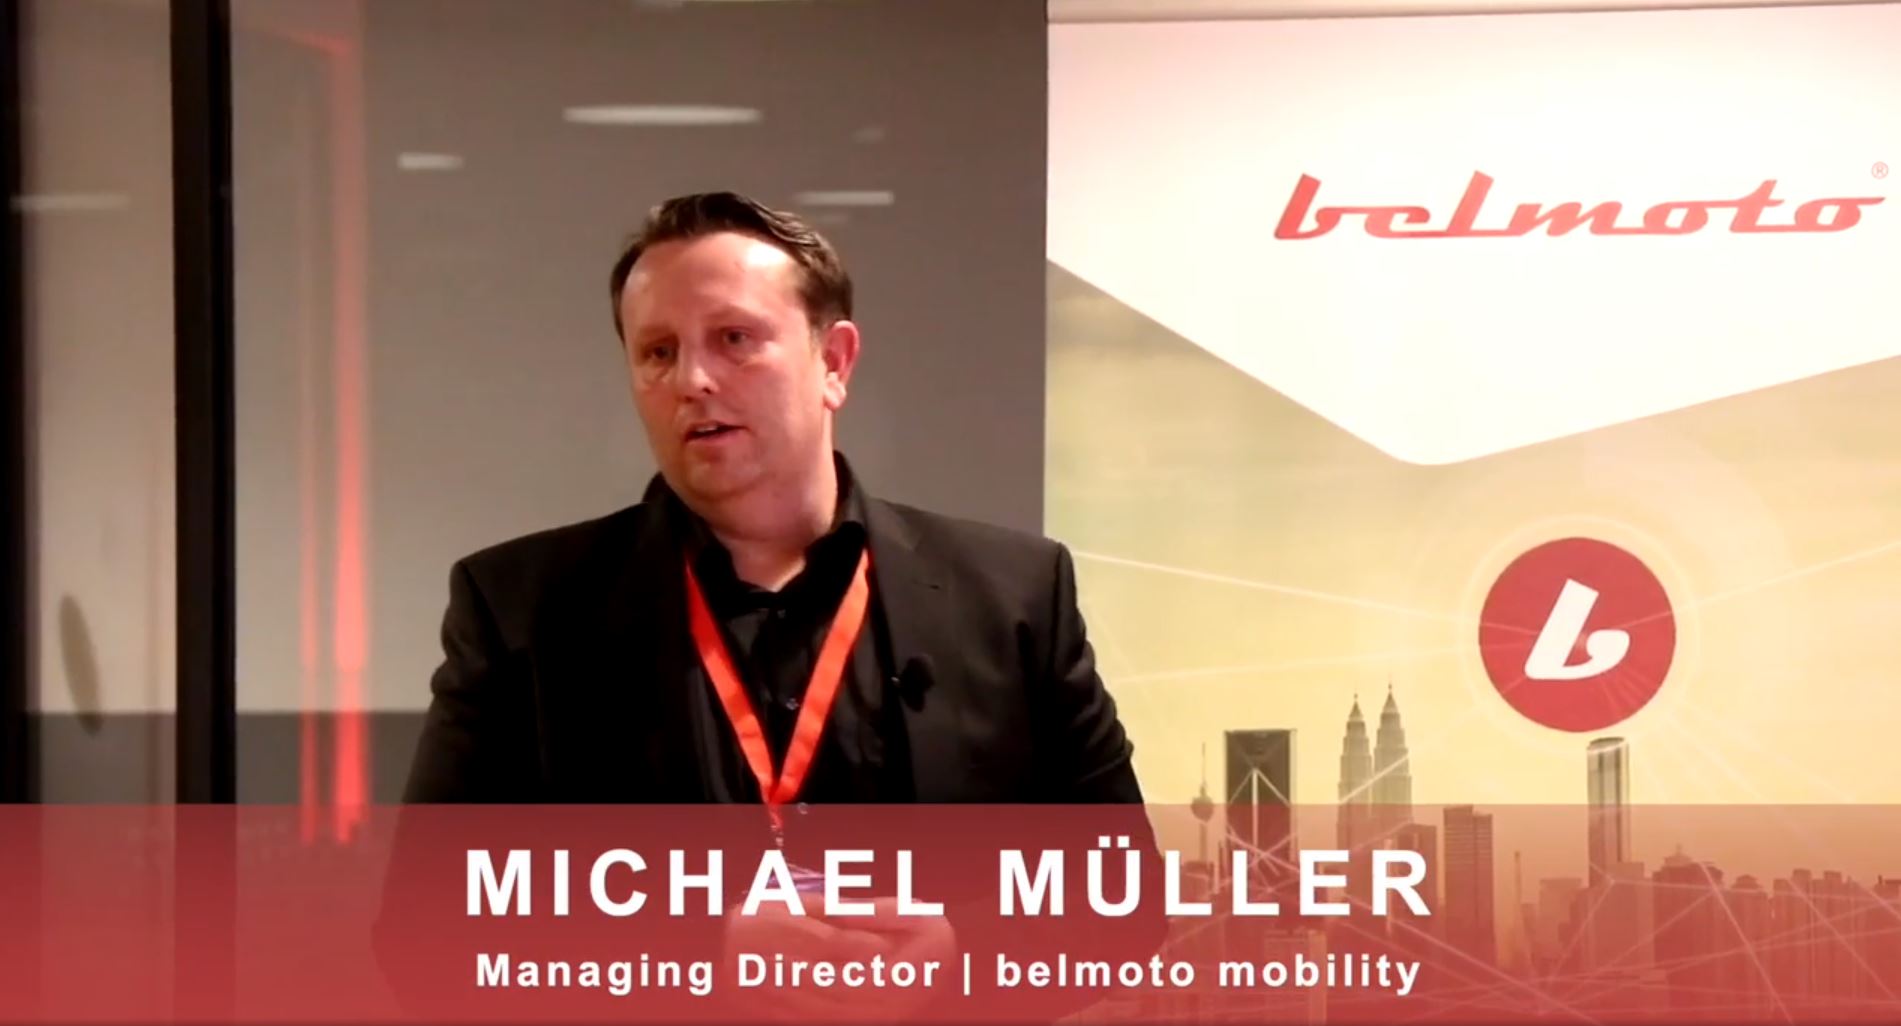 Talk “belmoto Mobility Card” from Michael Müller